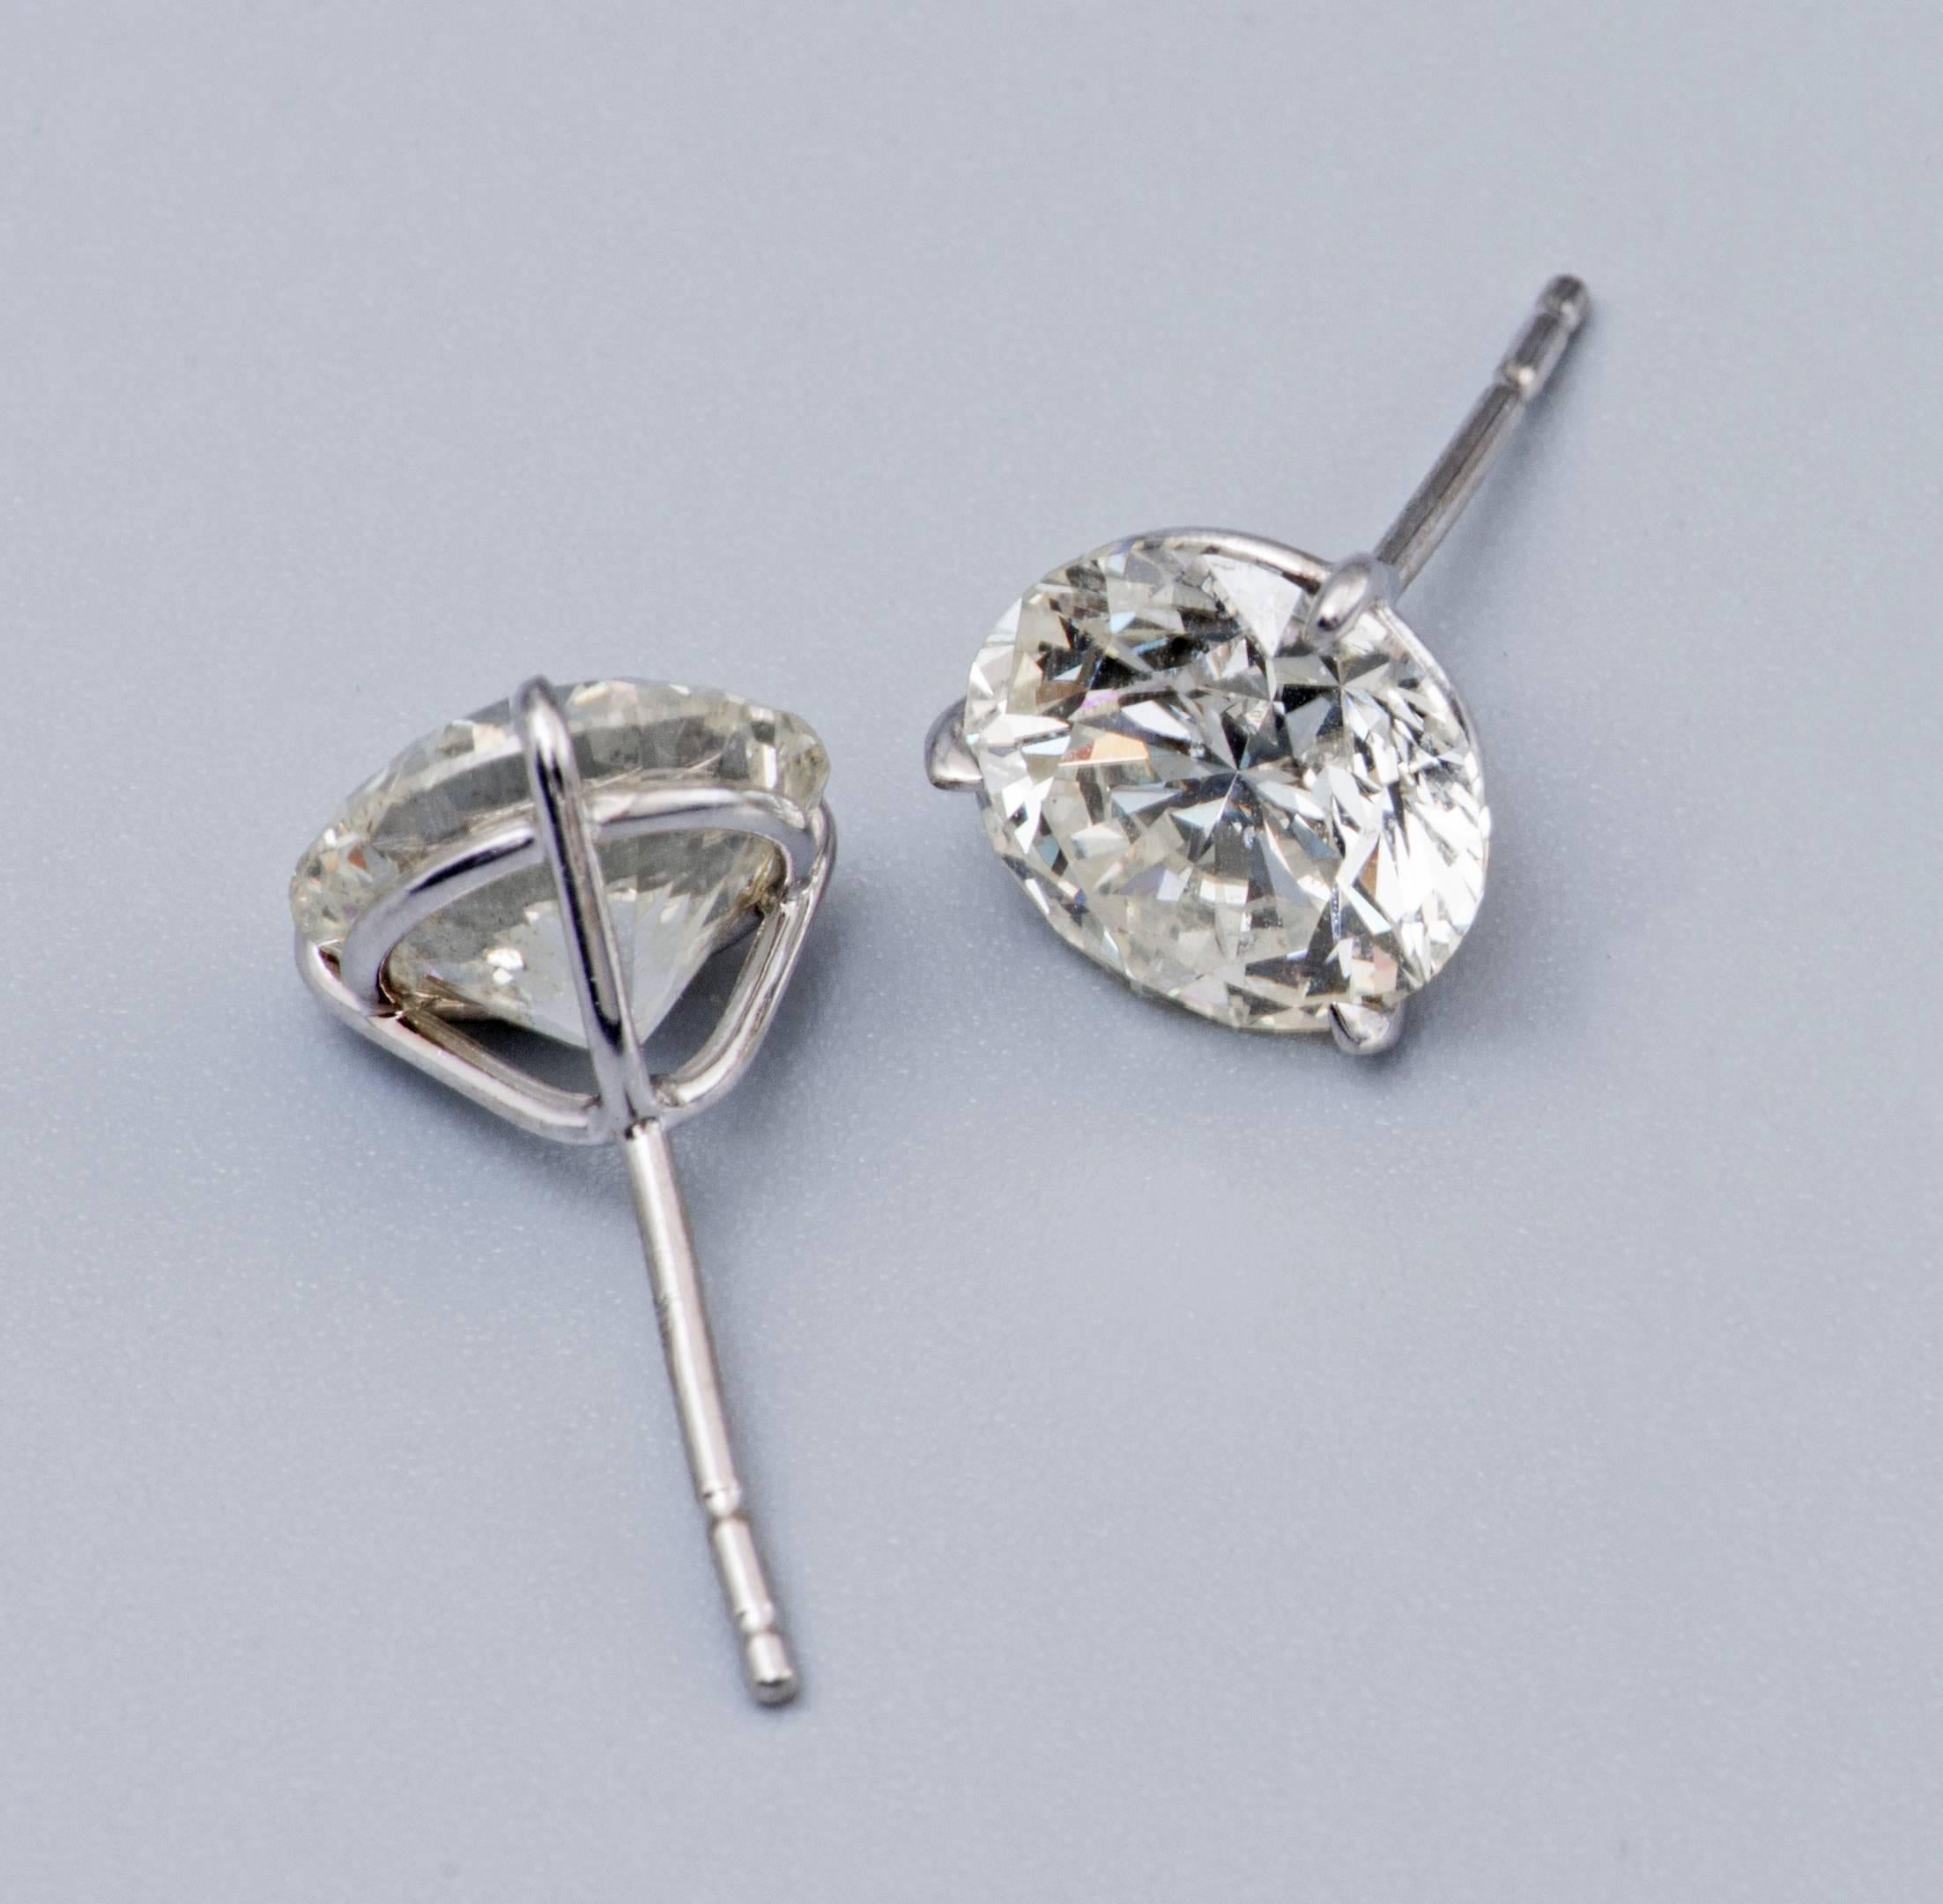 This beautiful pair of studs was matched by our expert gemologist.
18K white Gold
3.33 Cts. total weight
3 prong (can be changed with any other settings.)
Color: J-K 
Clarity: SI2 
High Brilliancy
Wholesale prices